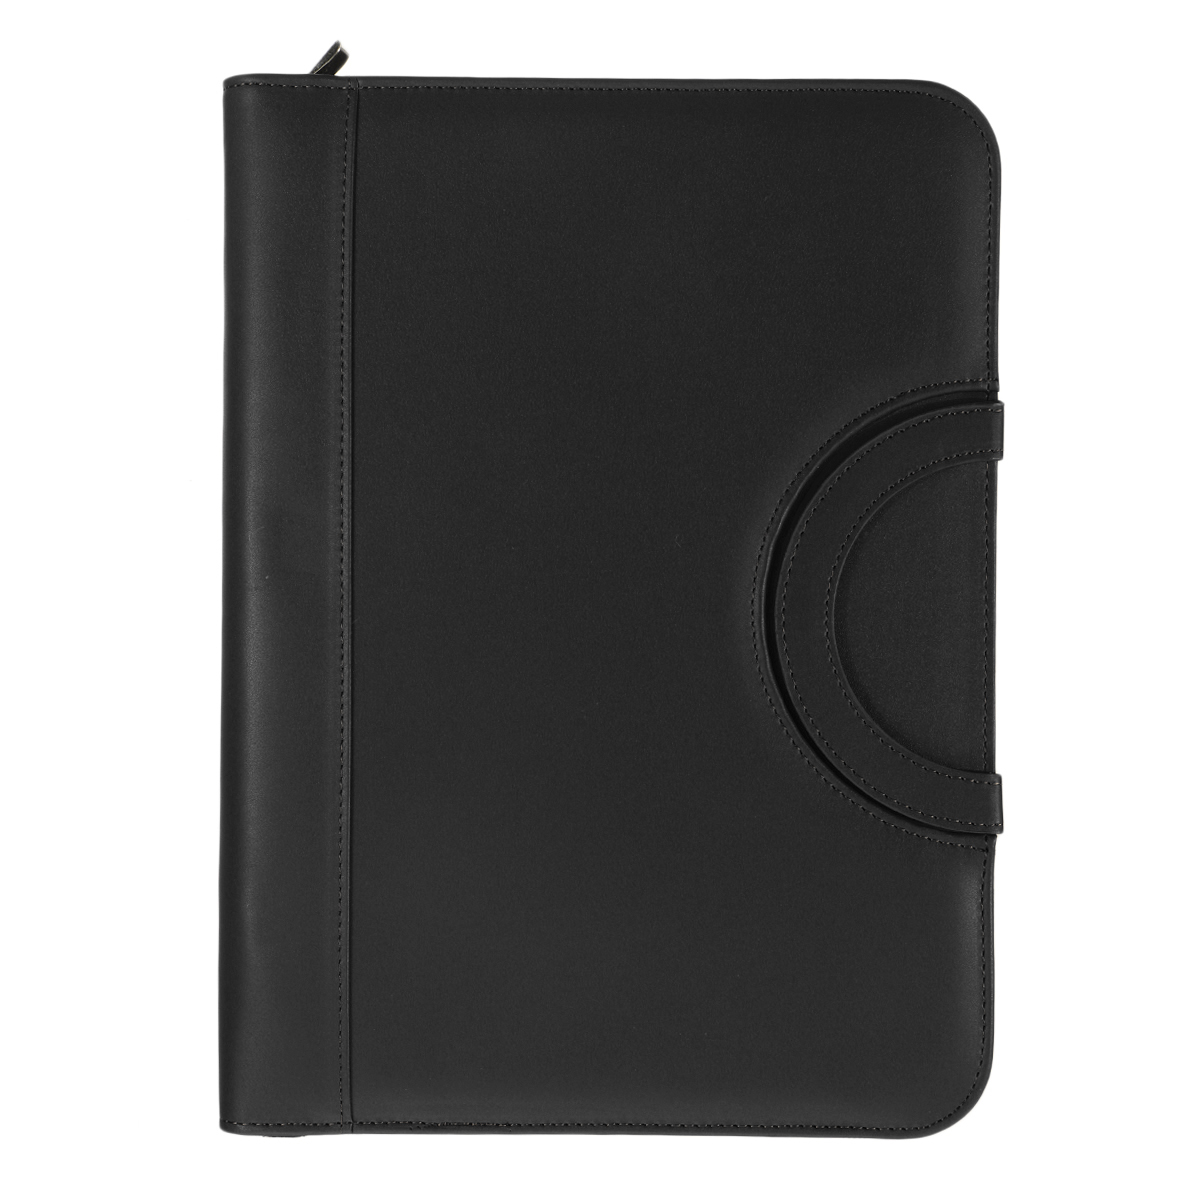 Find ATailorBird PF03 A4 PU Leather Office Document Folder Business Portable Multifunctional with Pen Slot Mobile Phone Storage Pack Pads Manager Portfolio Office Supplies for Sale on Gipsybee.com with cryptocurrencies